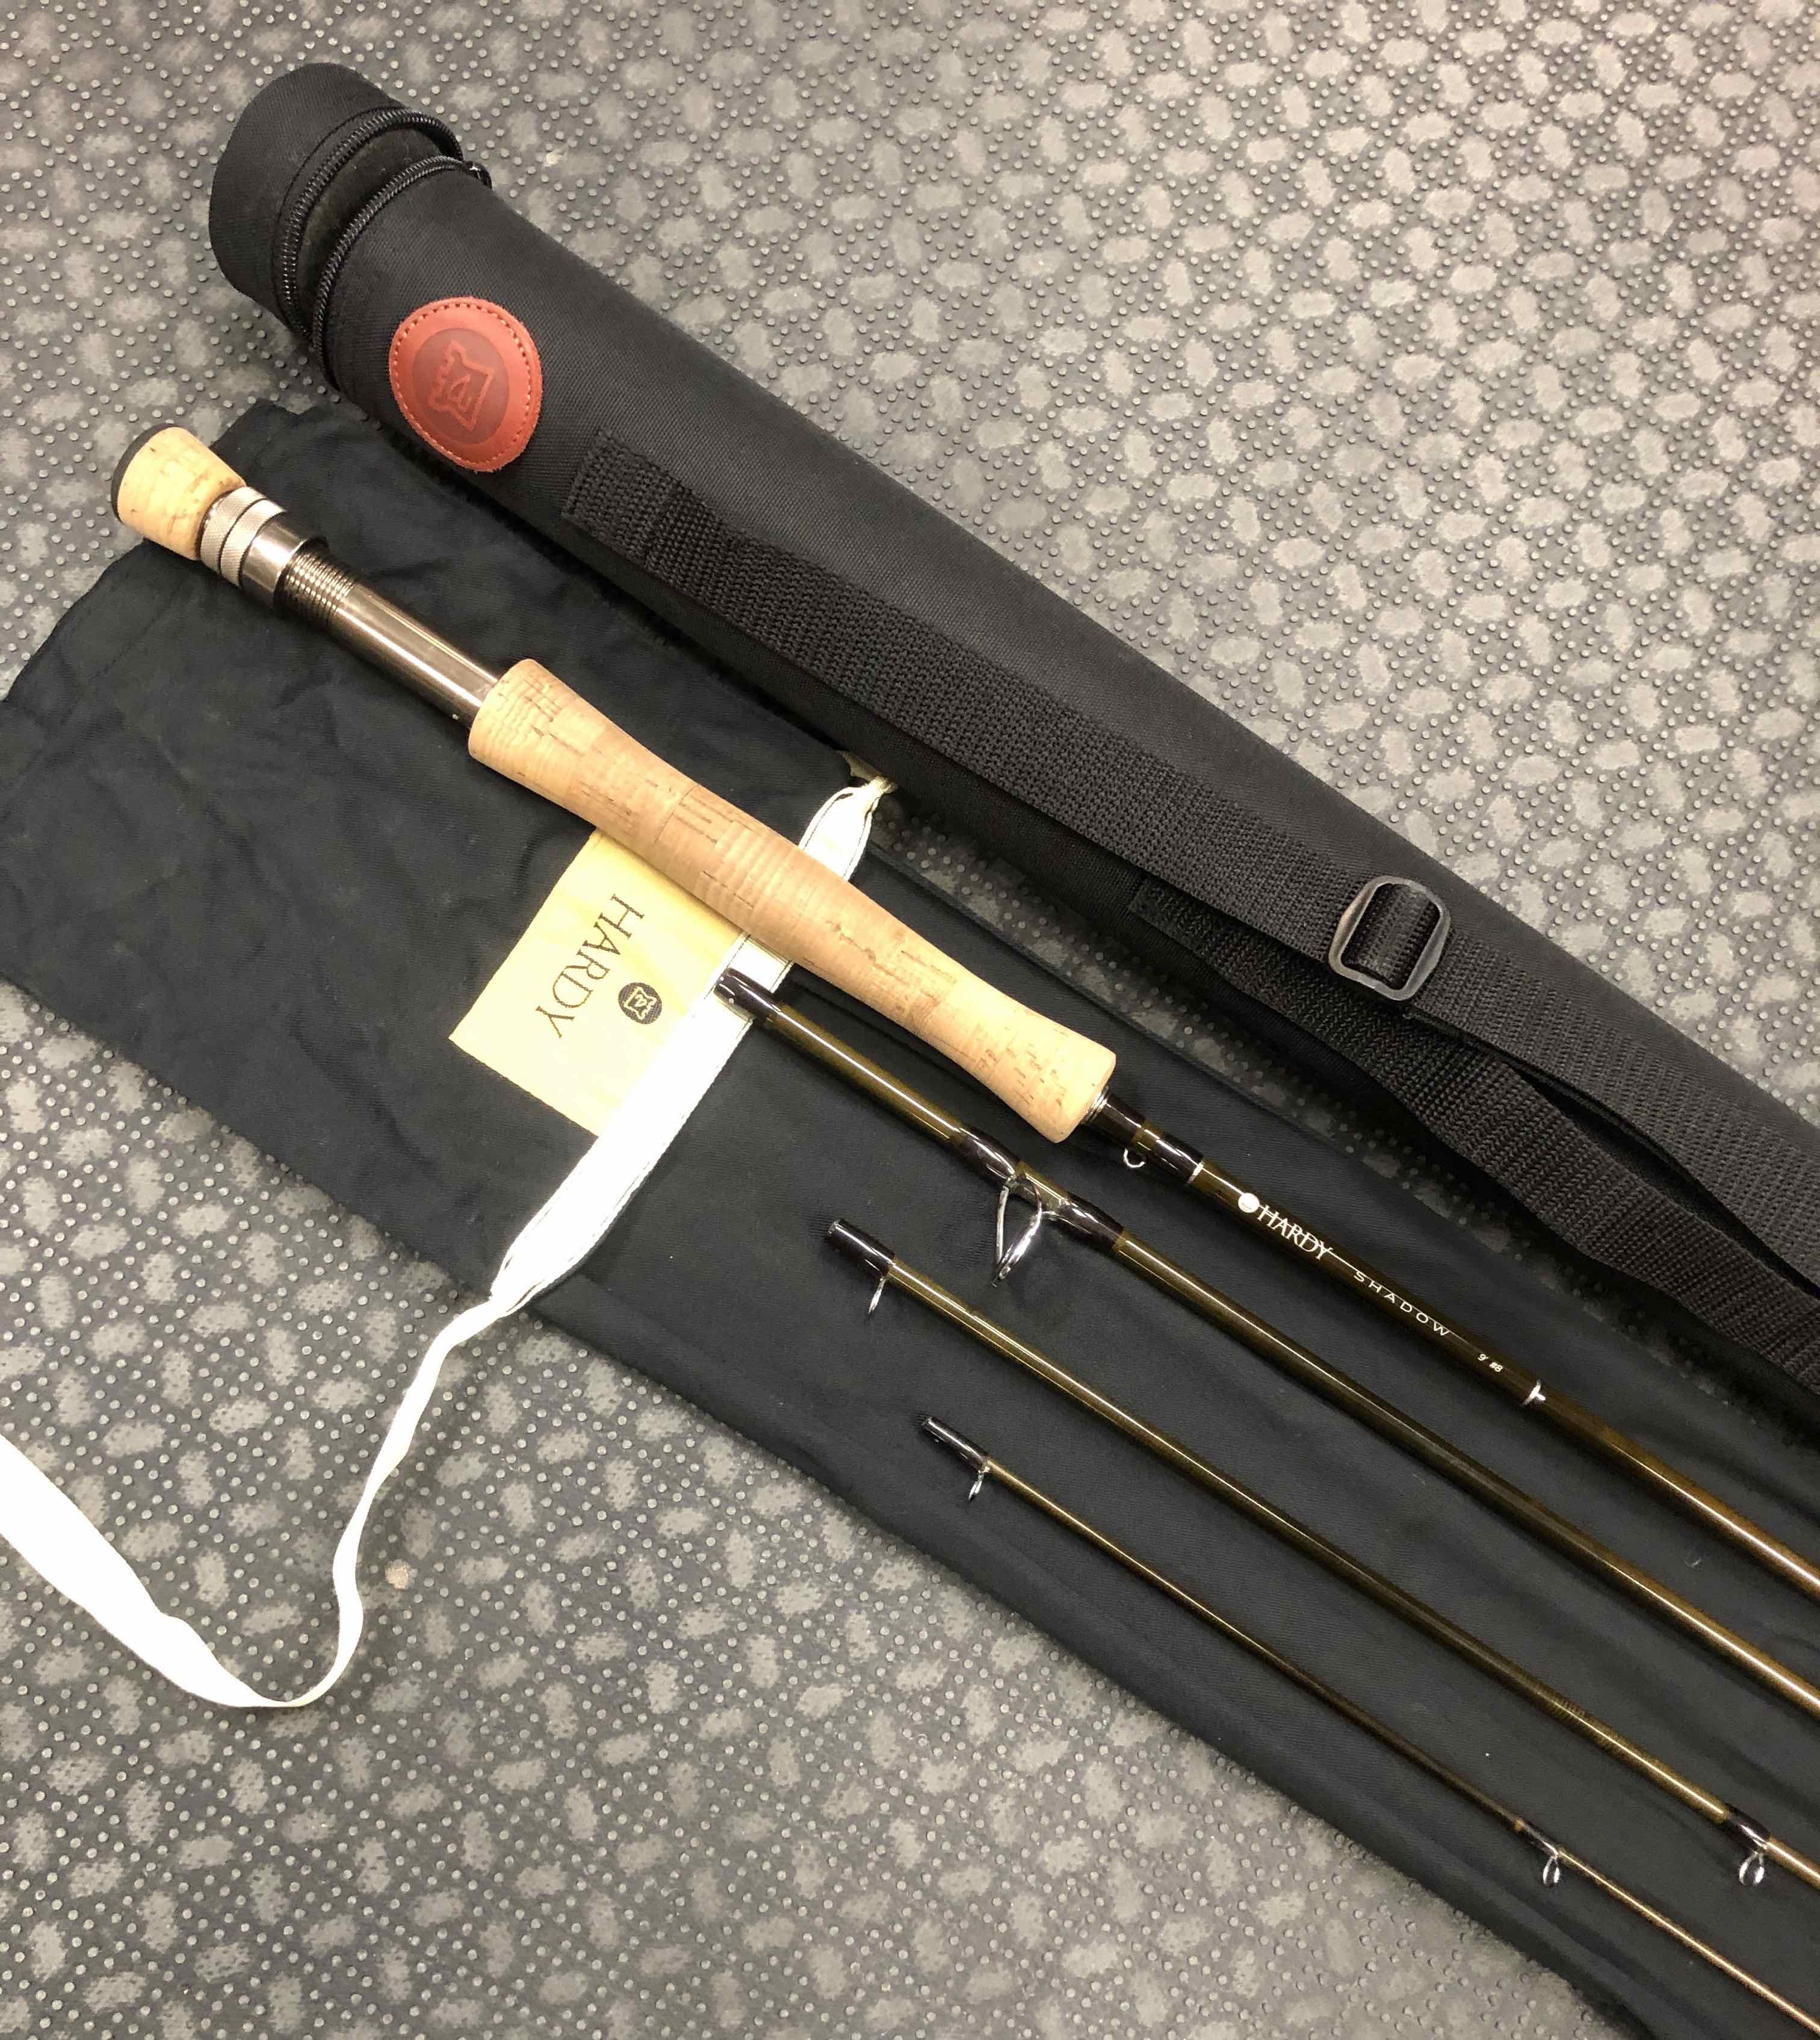 SOLD! – NEW PRICE! – Hardy Shadow 9′ 8Wt 4Pc Fly Rod – LIKE NEW